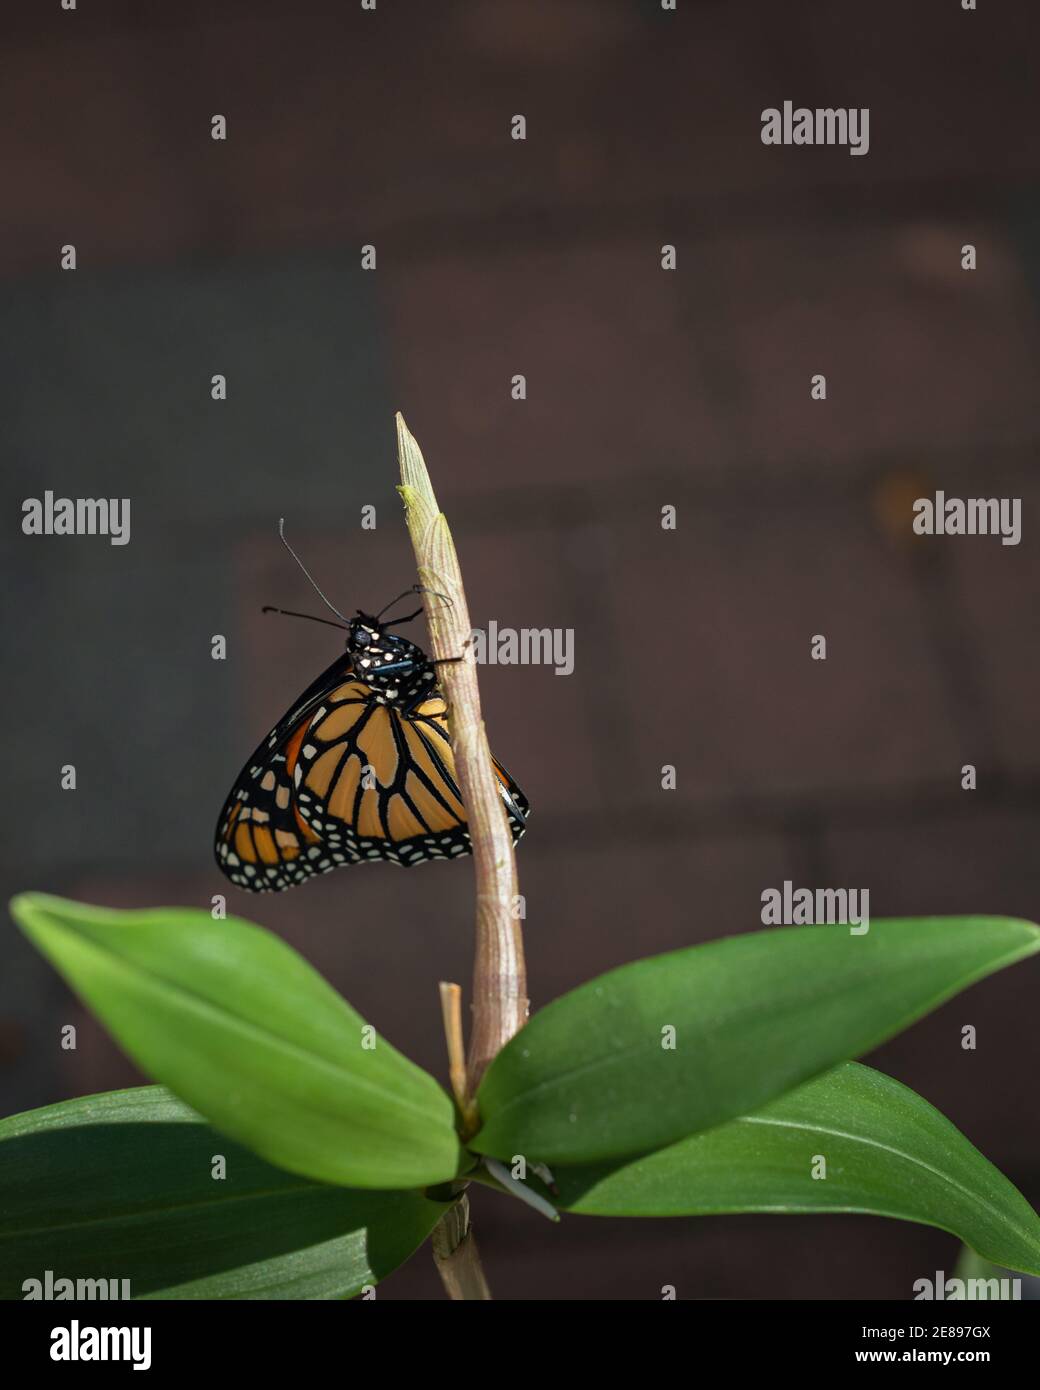 Monarch butterfly (danaus plexippus) just emerging from the chrysalis cocoon, drying its delicate wings against the brick wall background. Vertical fo Stock Photo